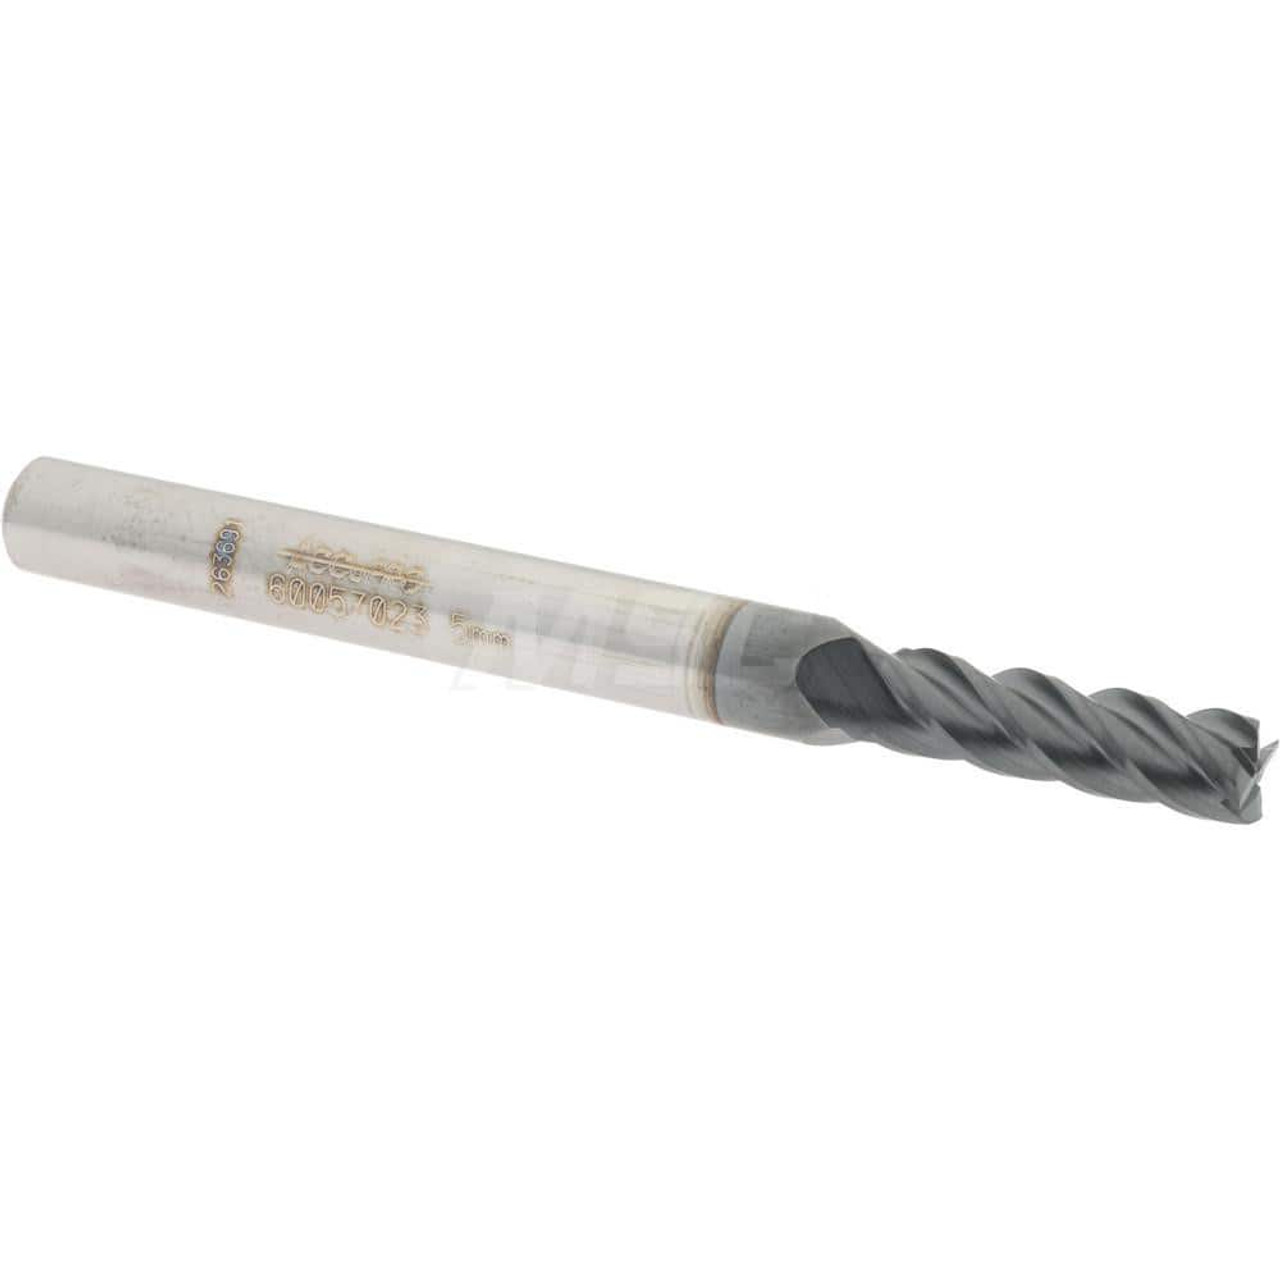 Accupro 5mm 16mm Loc 6mm Shank Diam 63mm Oal 4 Flute Solid Carbide Square End Mill Single